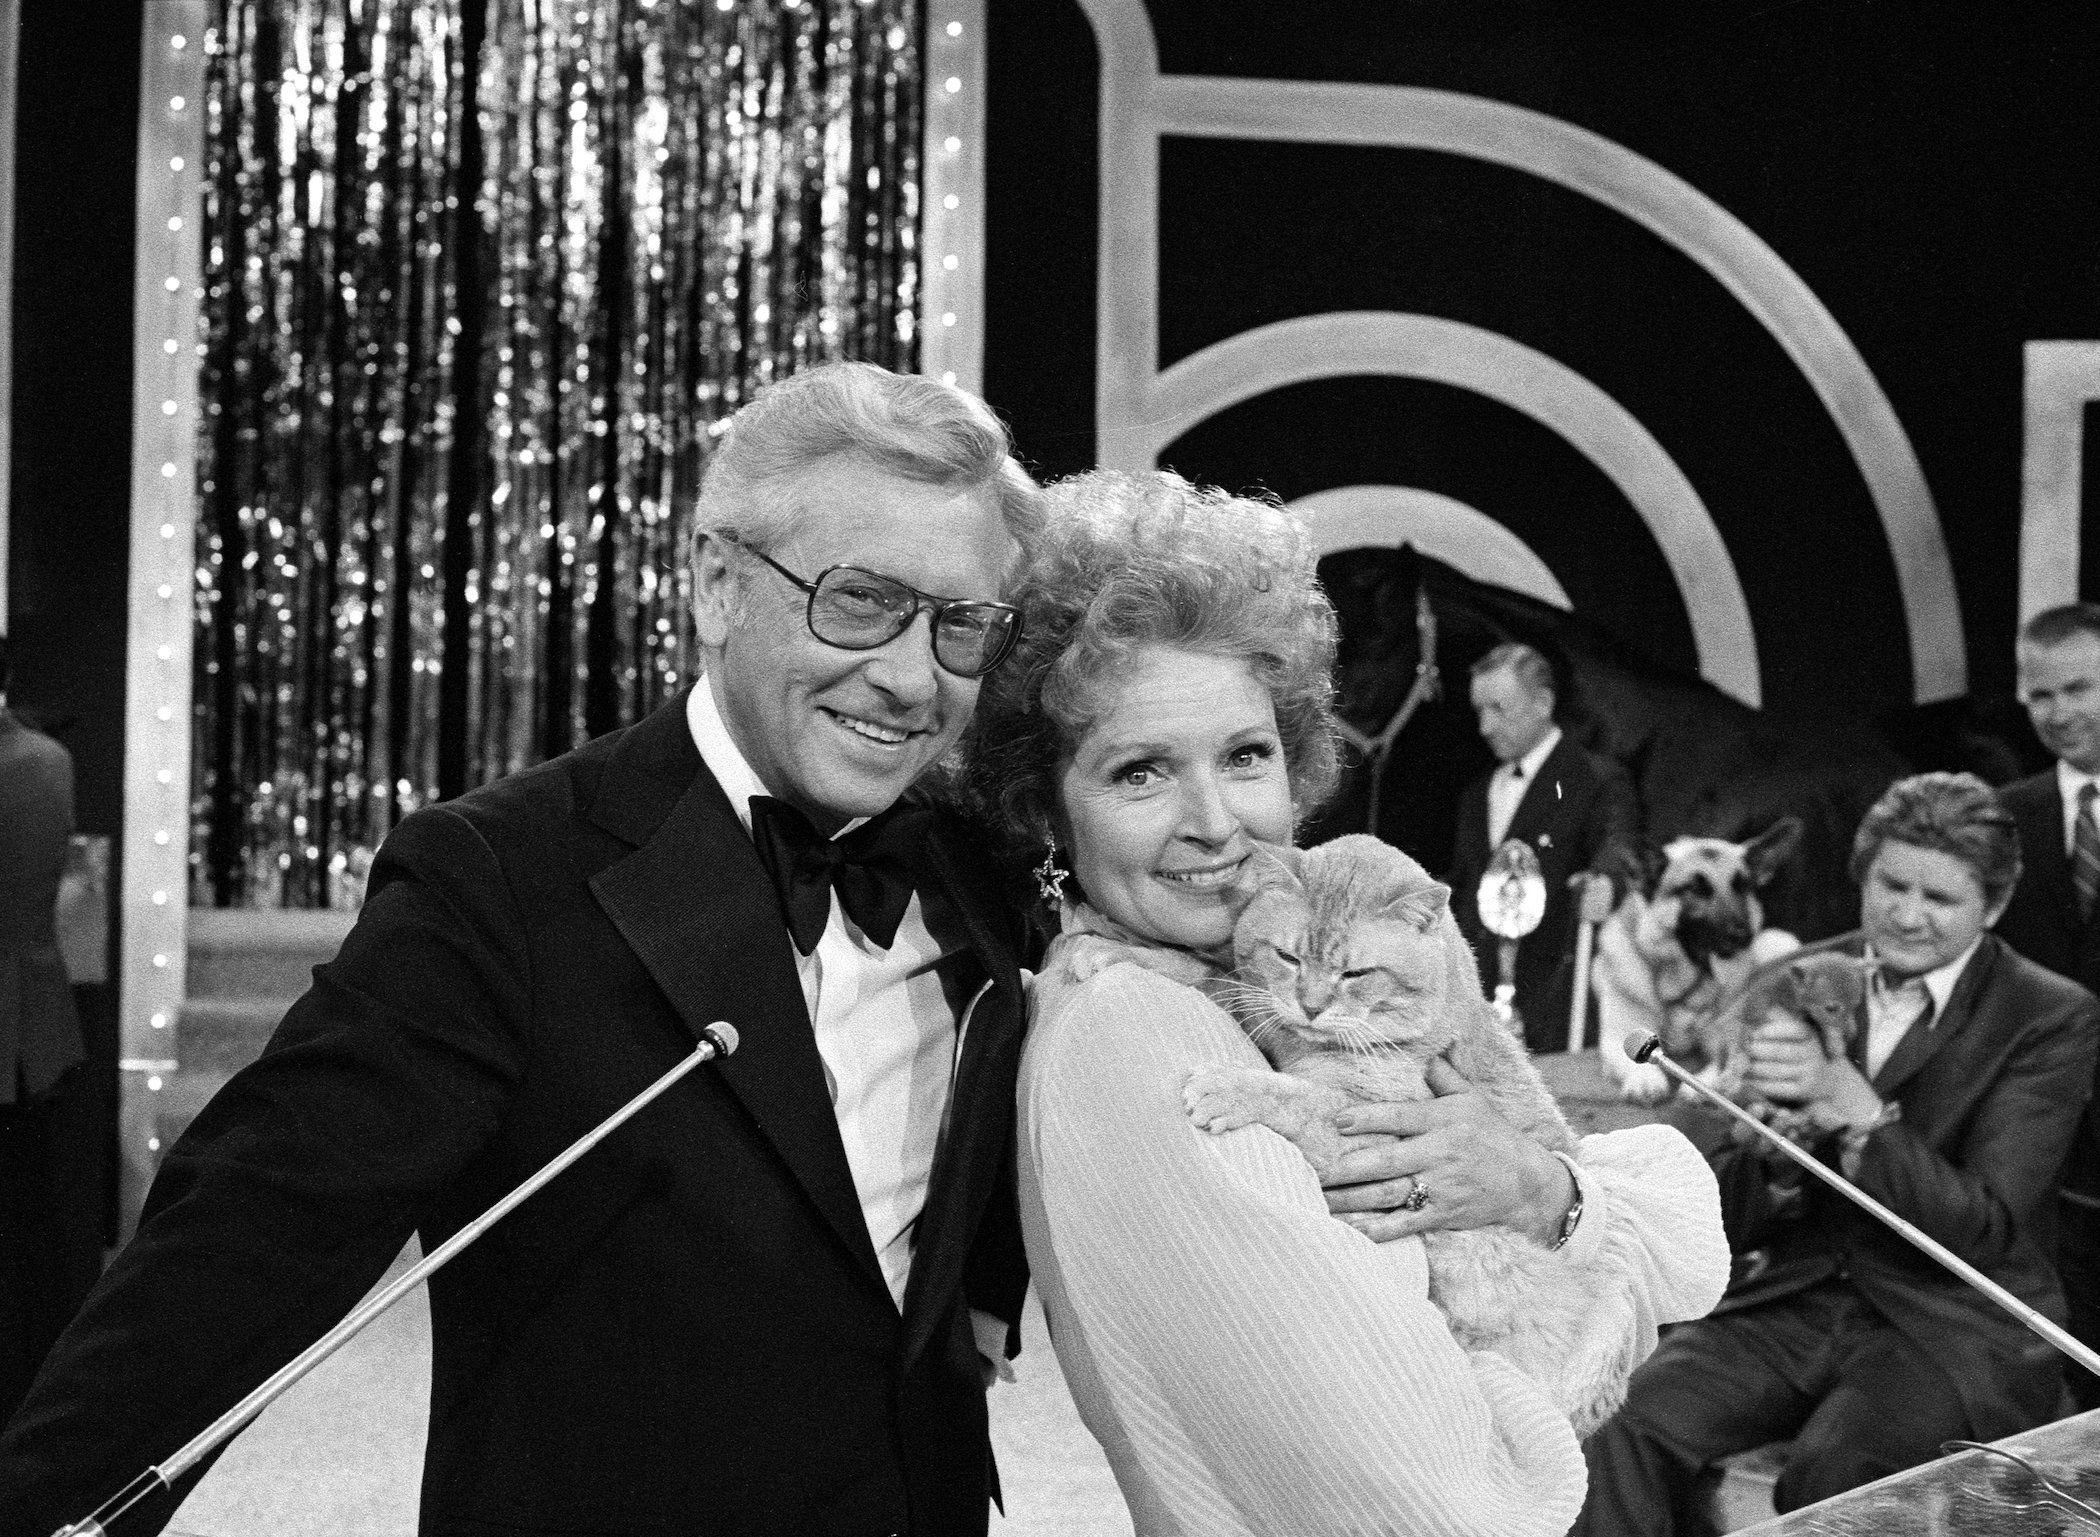 A black and white photo with Betty White's spouse Allen Ludden next to Betty White holding a cat and smiling